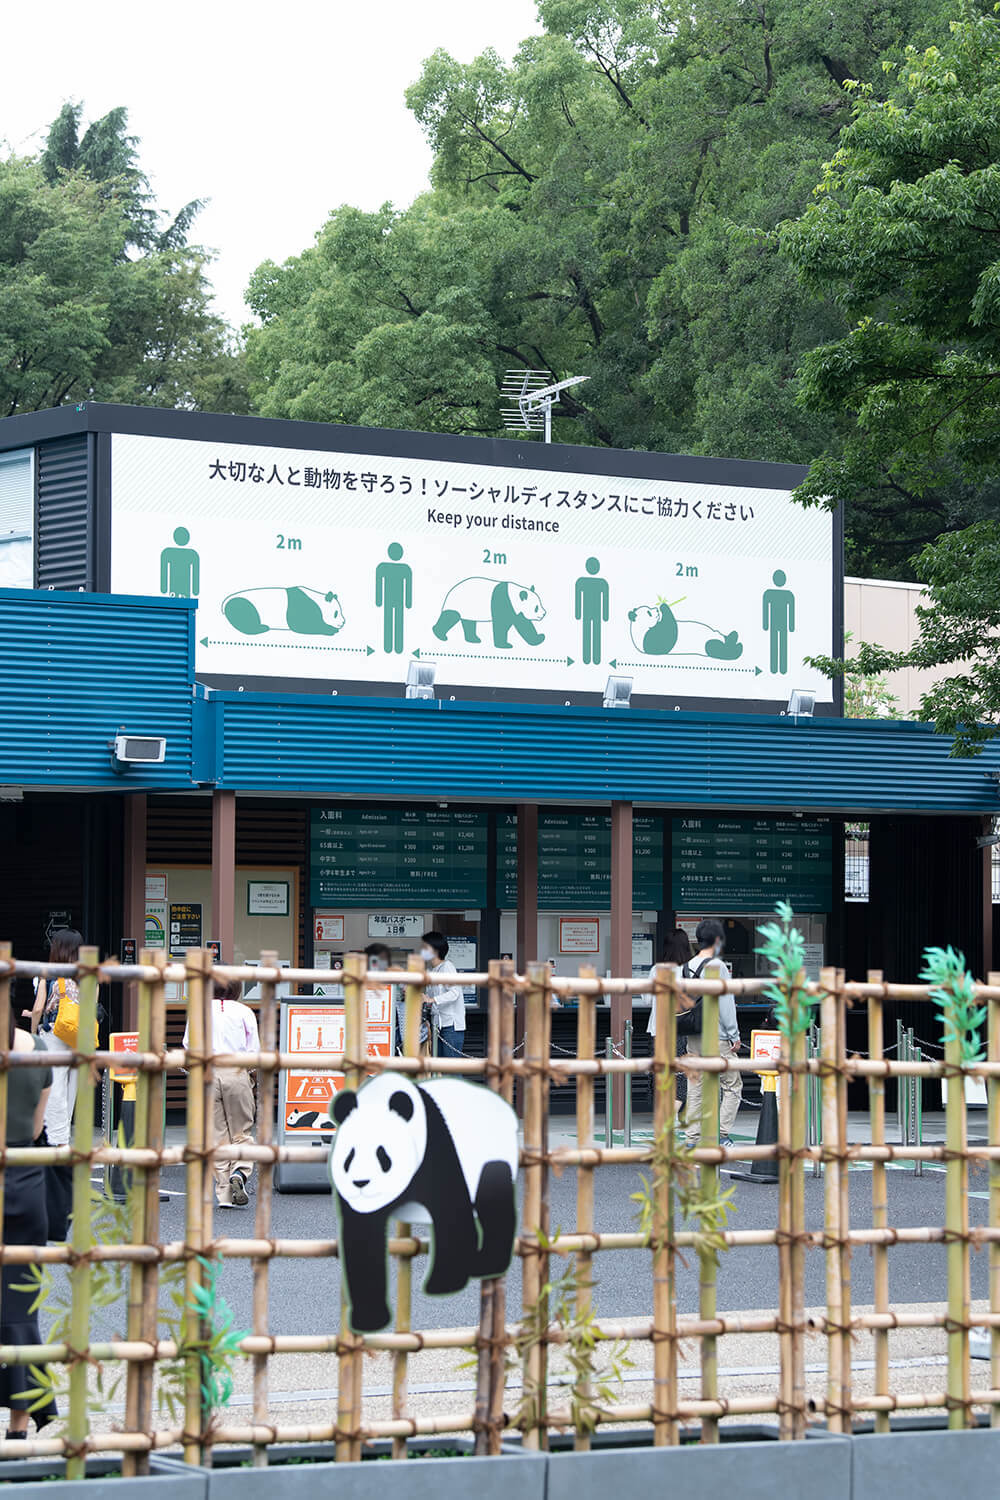 During the epidemic, Ueno Zoo must maintain a social distance of 2 meters when queuing. Gao's Guibo Picture